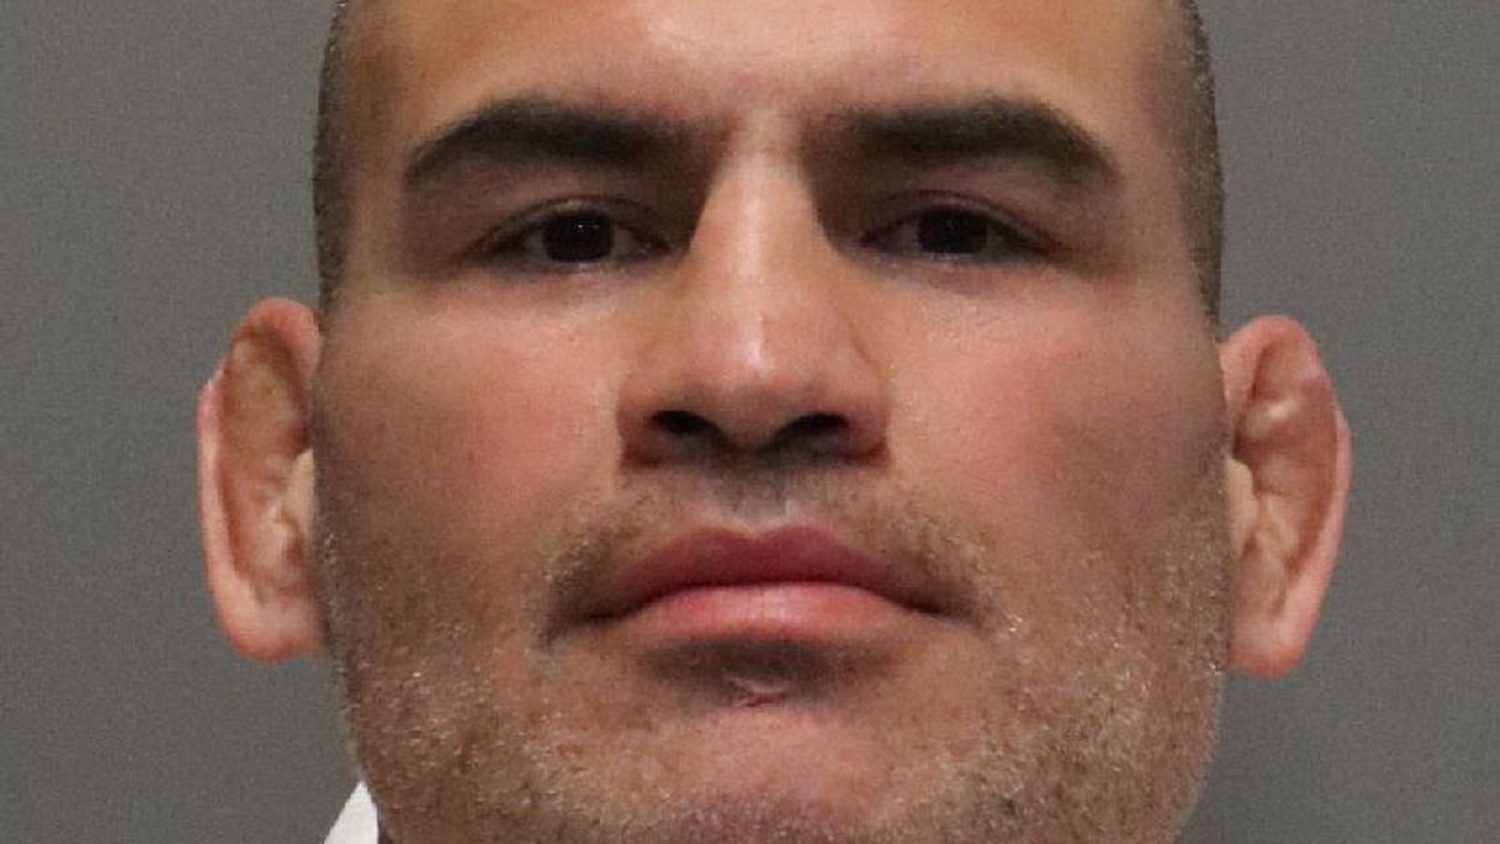 Ufc Champ Cain Velasquez Tried To Kill Man Who Molested His 4-year-old Son At Daycare: Reports